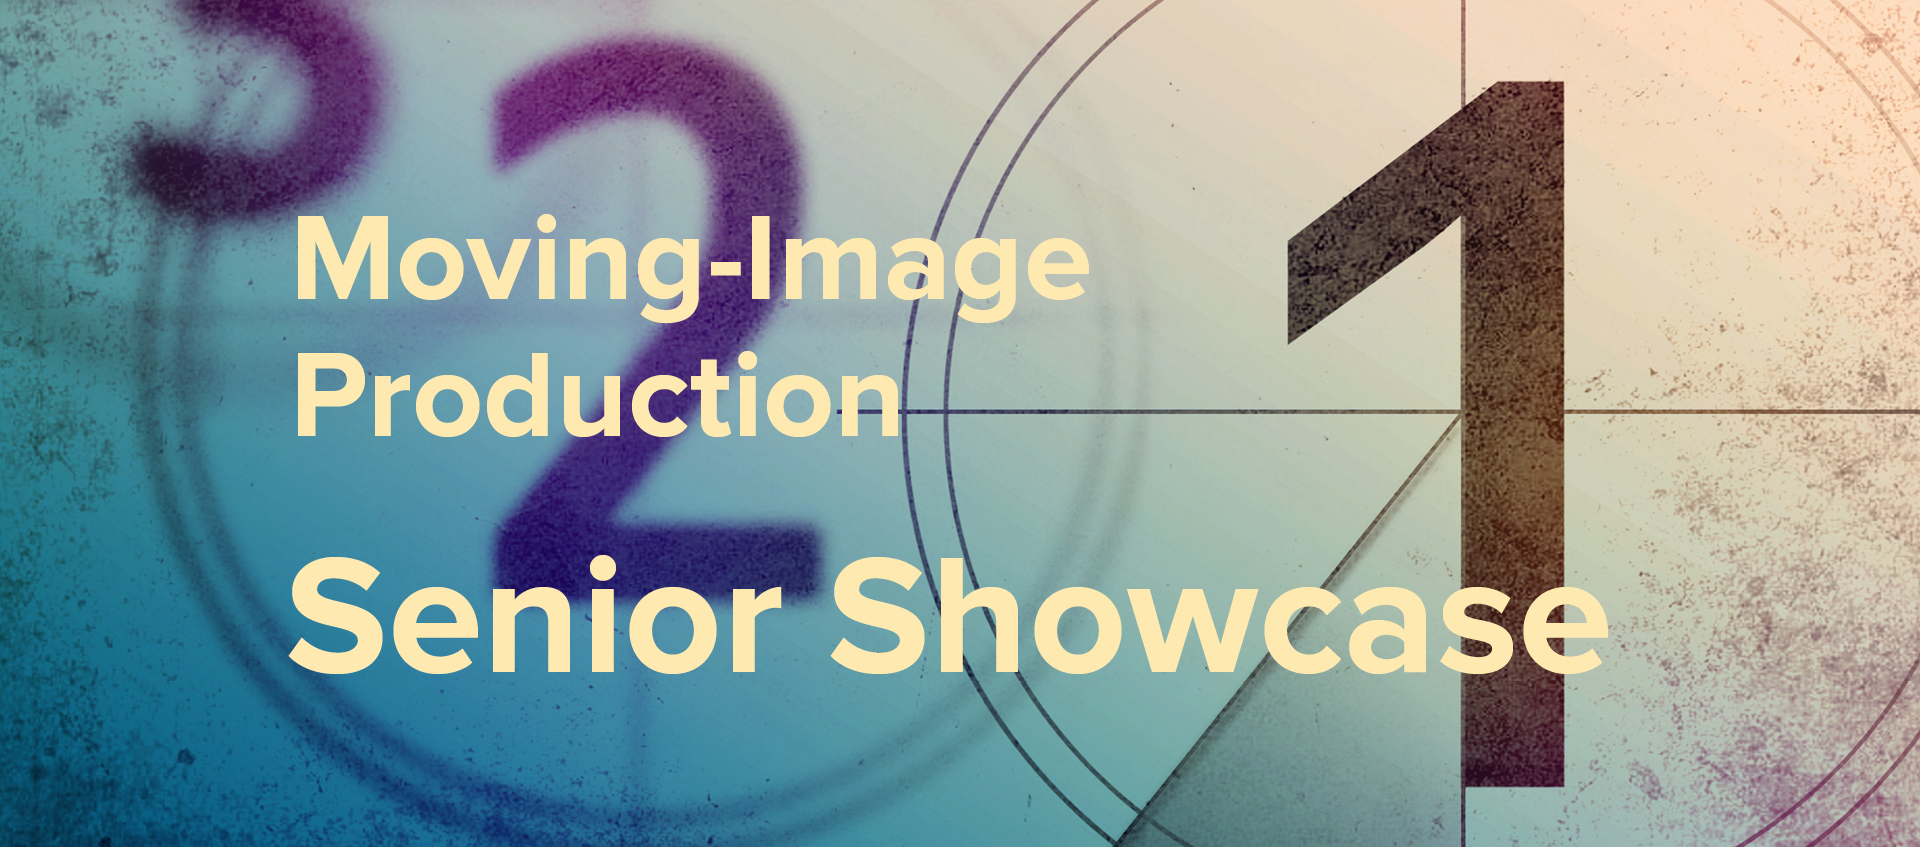 The words “Moving-Image Production Senior Showcase” appear over a background of numbers counting down 3-2-1.